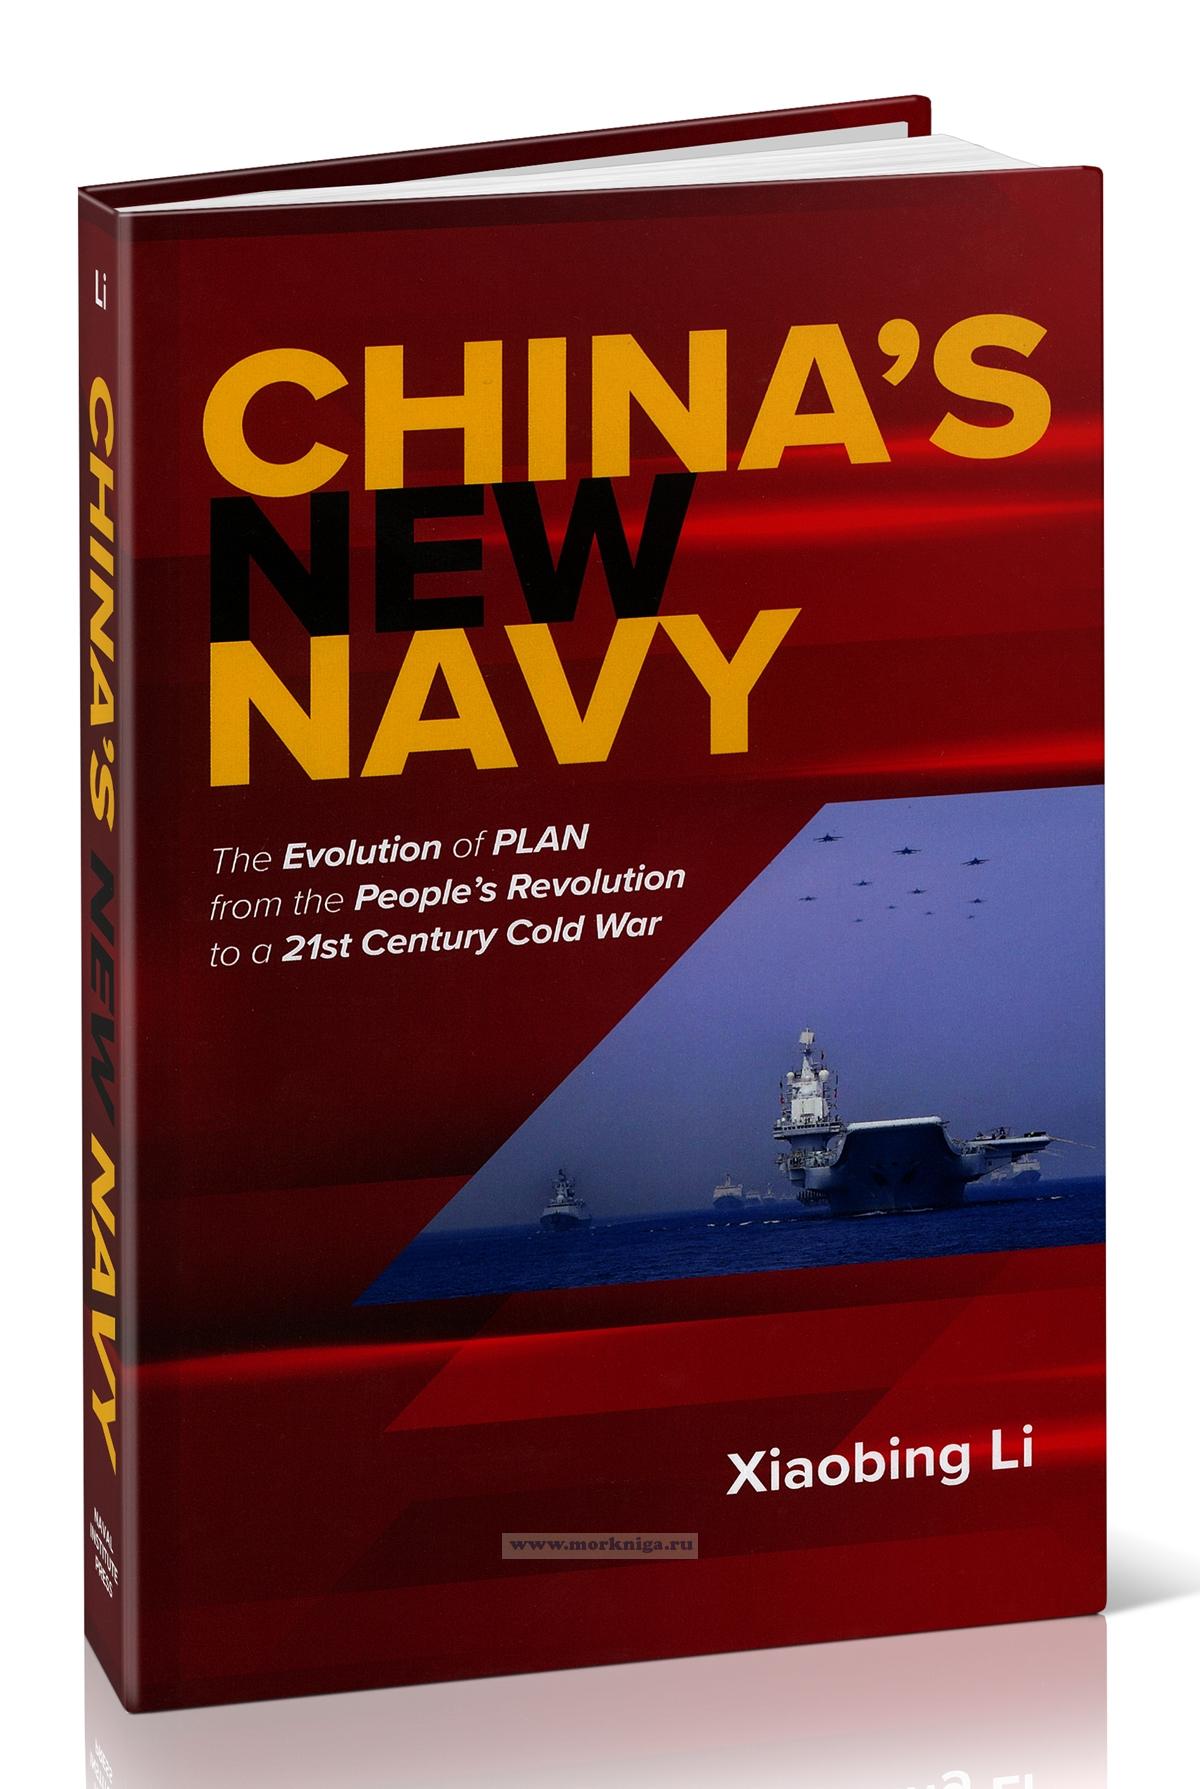 China's New Navy. The Evolution of PLAN from the People's Revolution to a 21st Century Cold War